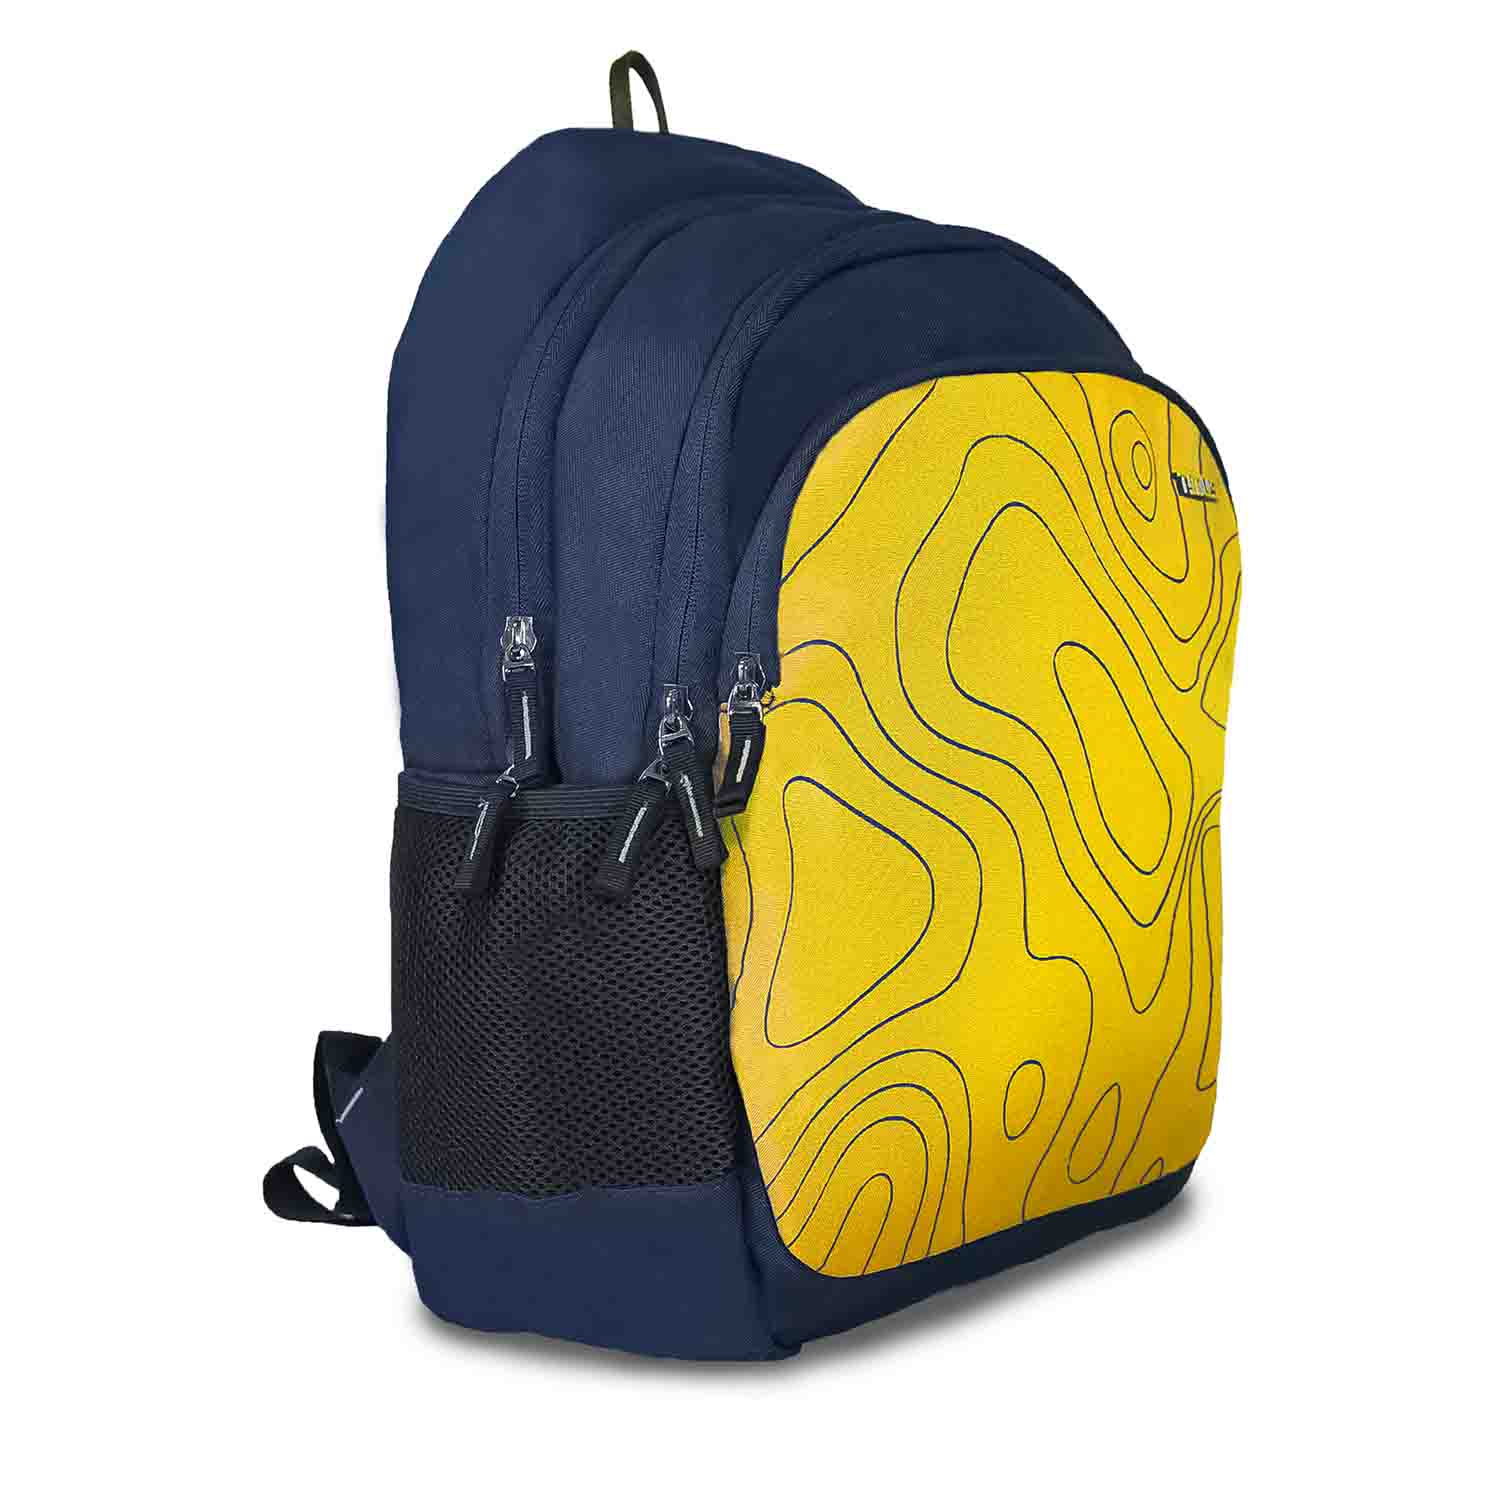 Timus-Lifestyle-backpacks-casual-backpacks-chile-yellow-5